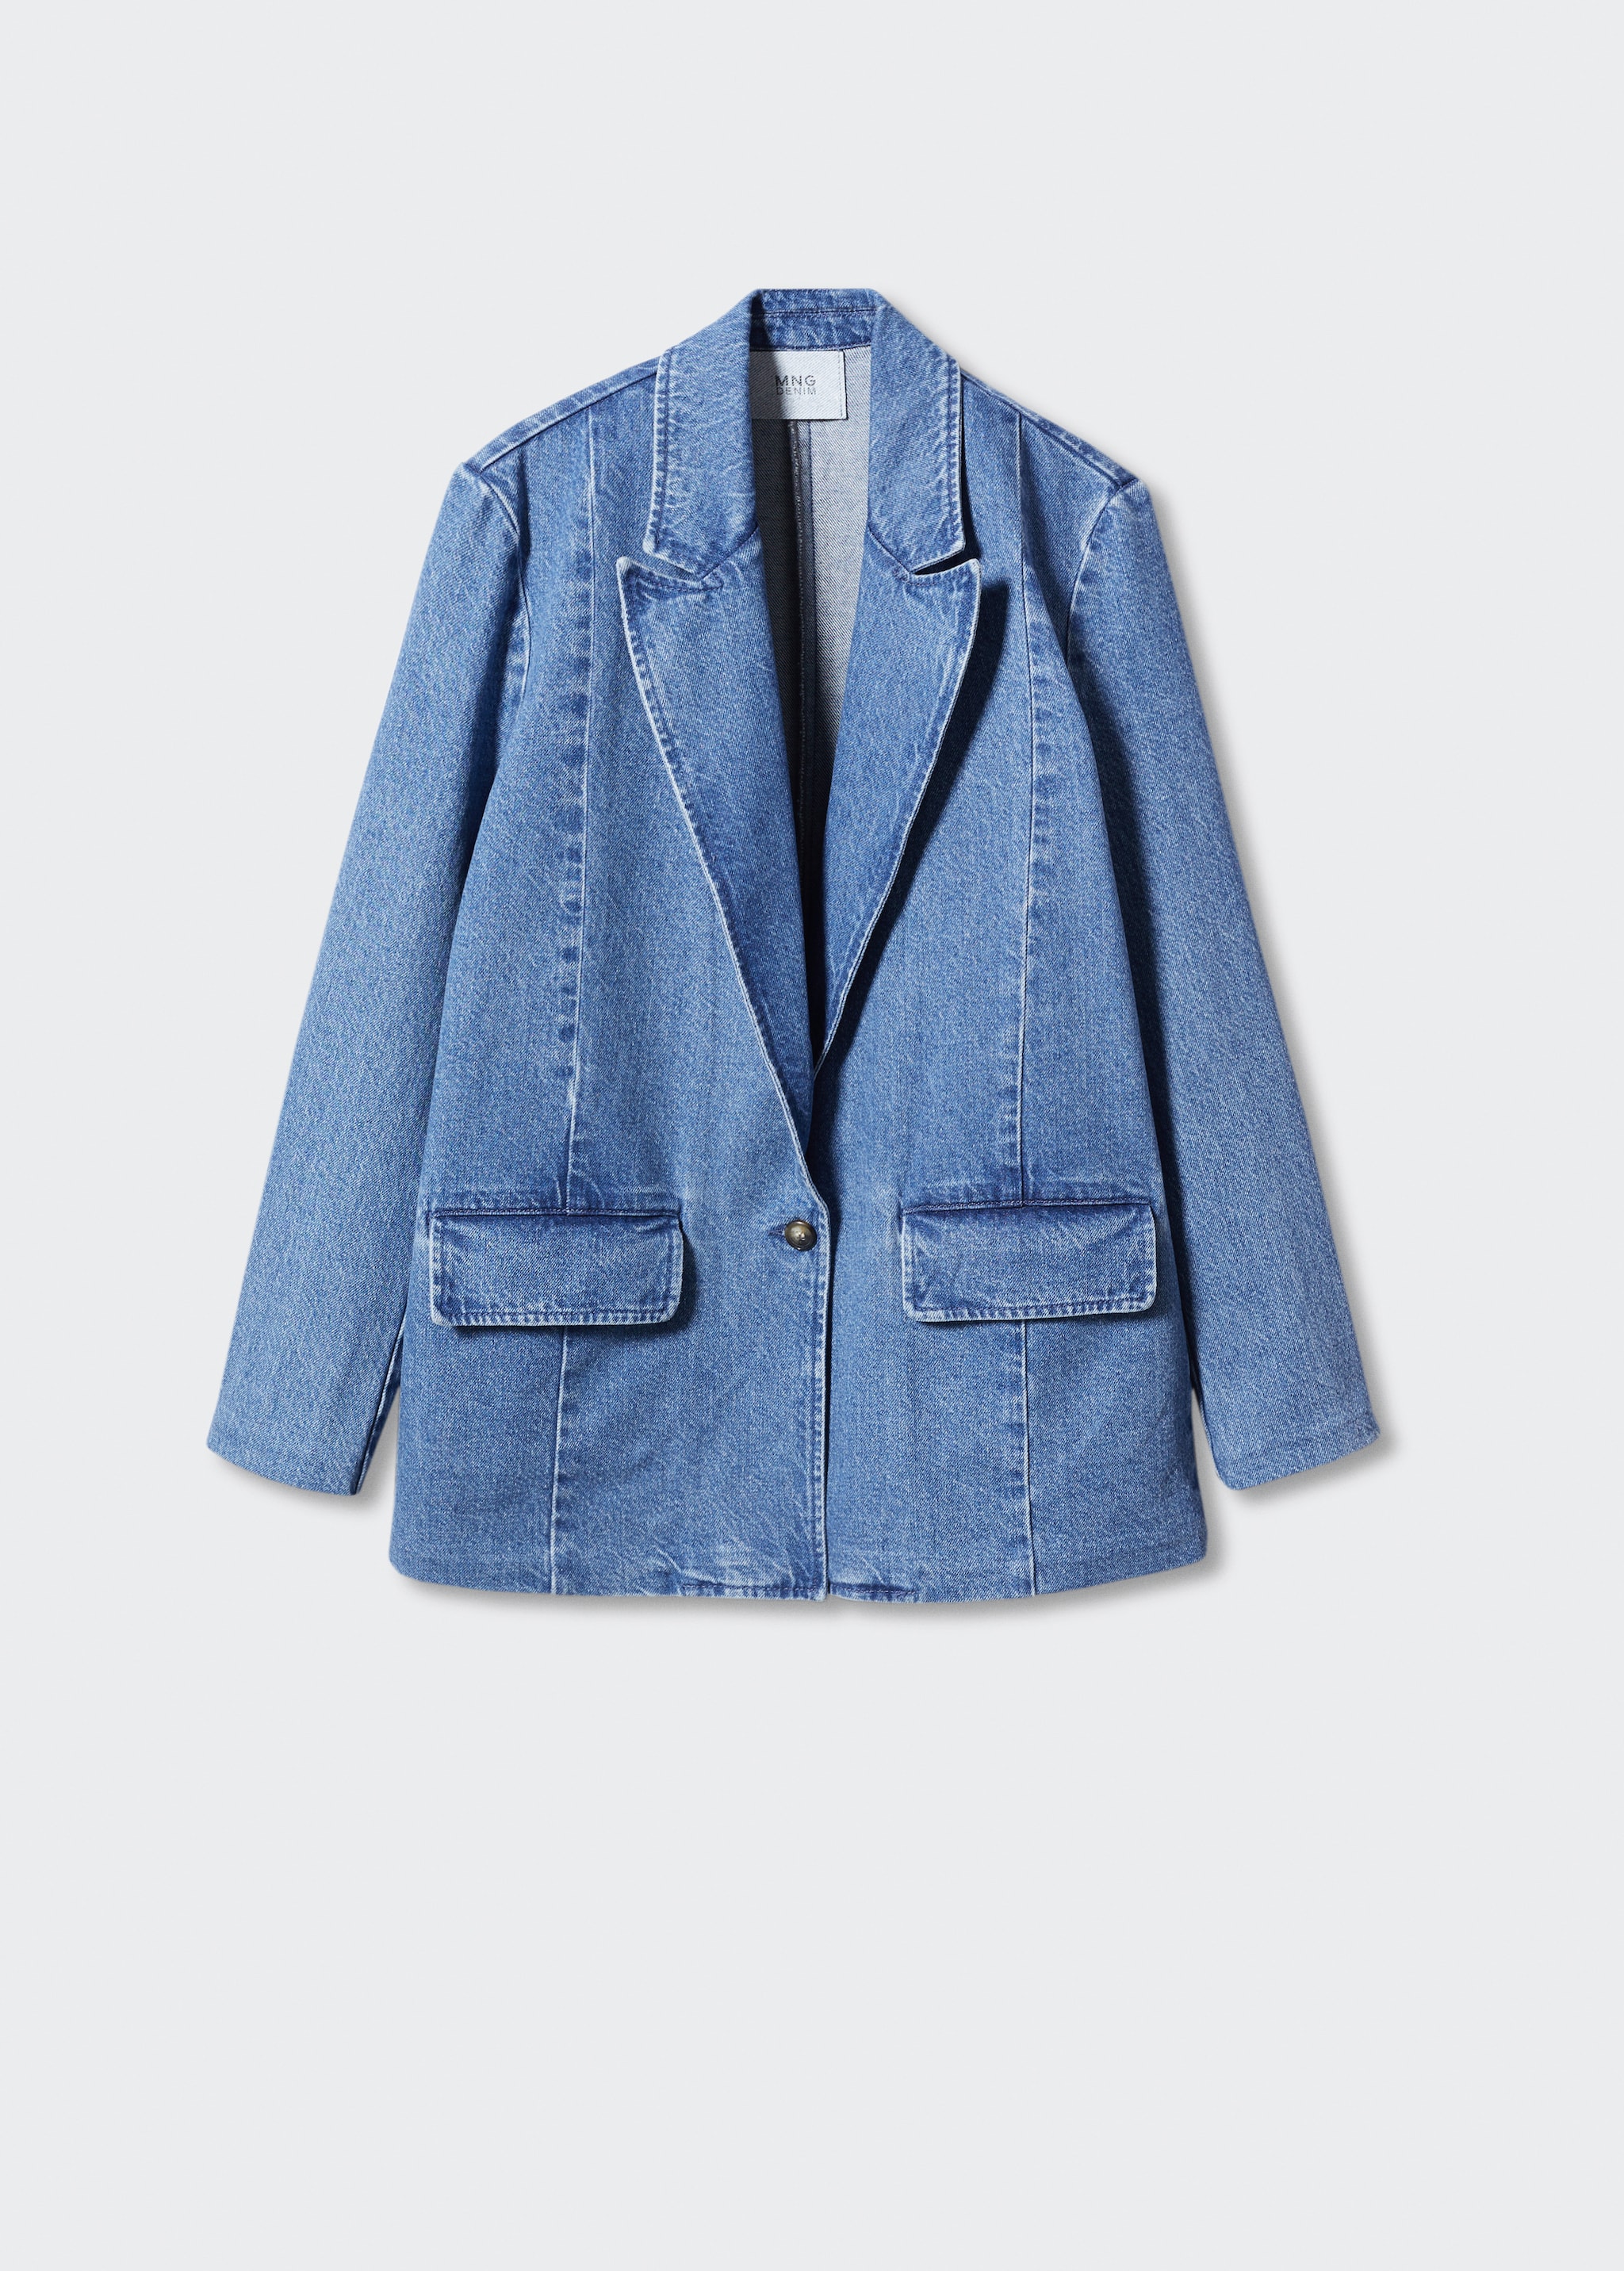 Denim jacket with pockets - Article without model